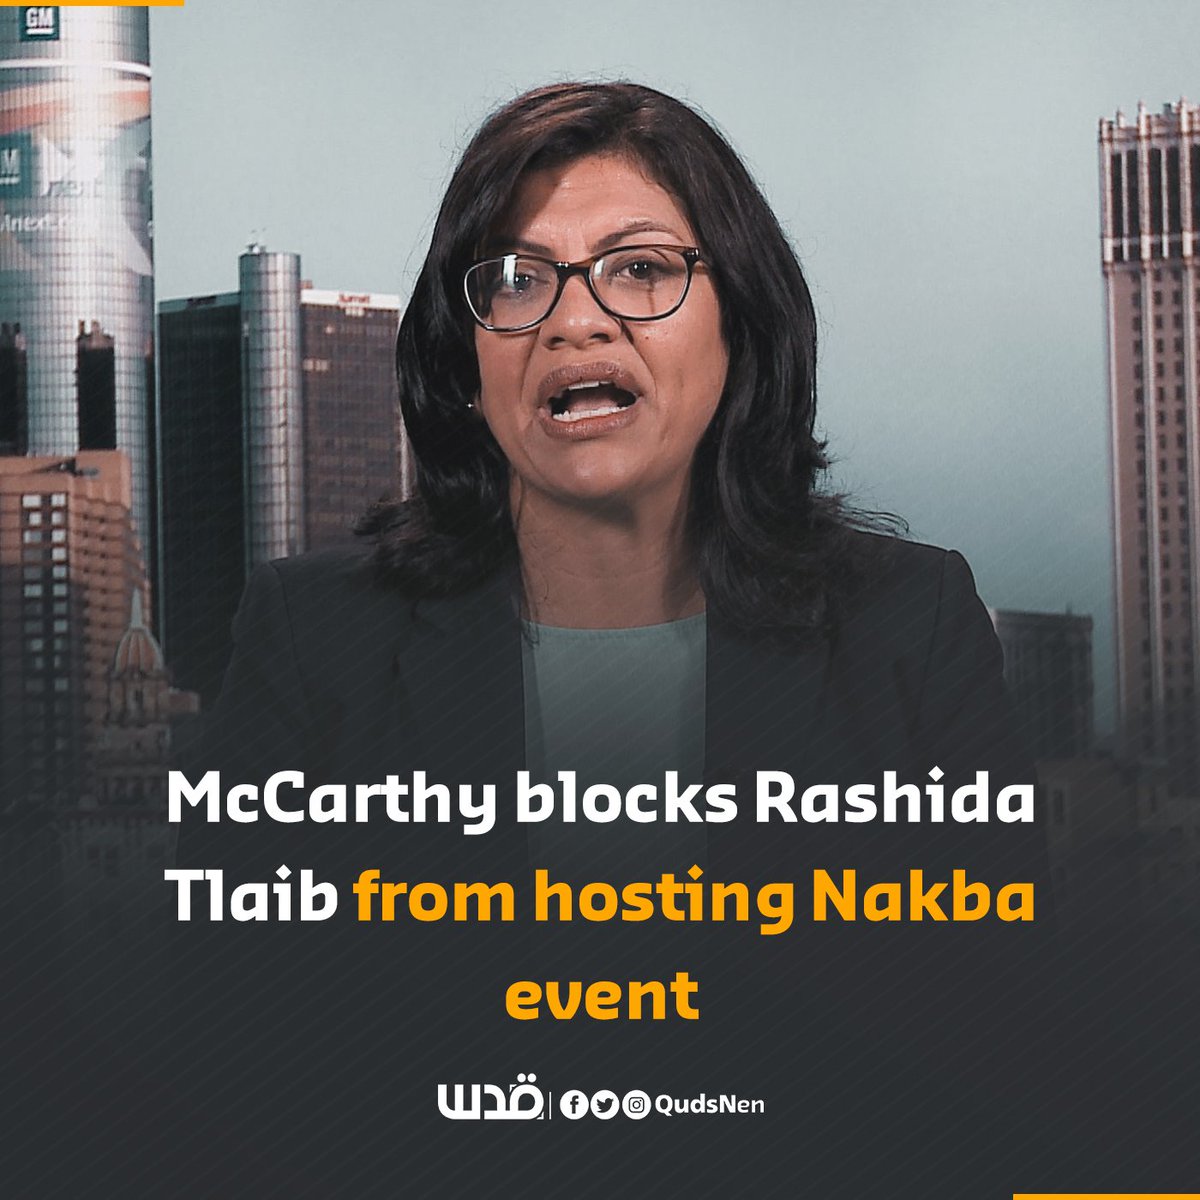 US House Speaker Kevin McCarthy has blocked Rep. Rashida Tlaib from hosting a Capitol Building event in partnership with pro-Palestine groups to commemorate Nakba Day, which marks the Zionist forces' ethnic cleansing of historic Palestine.